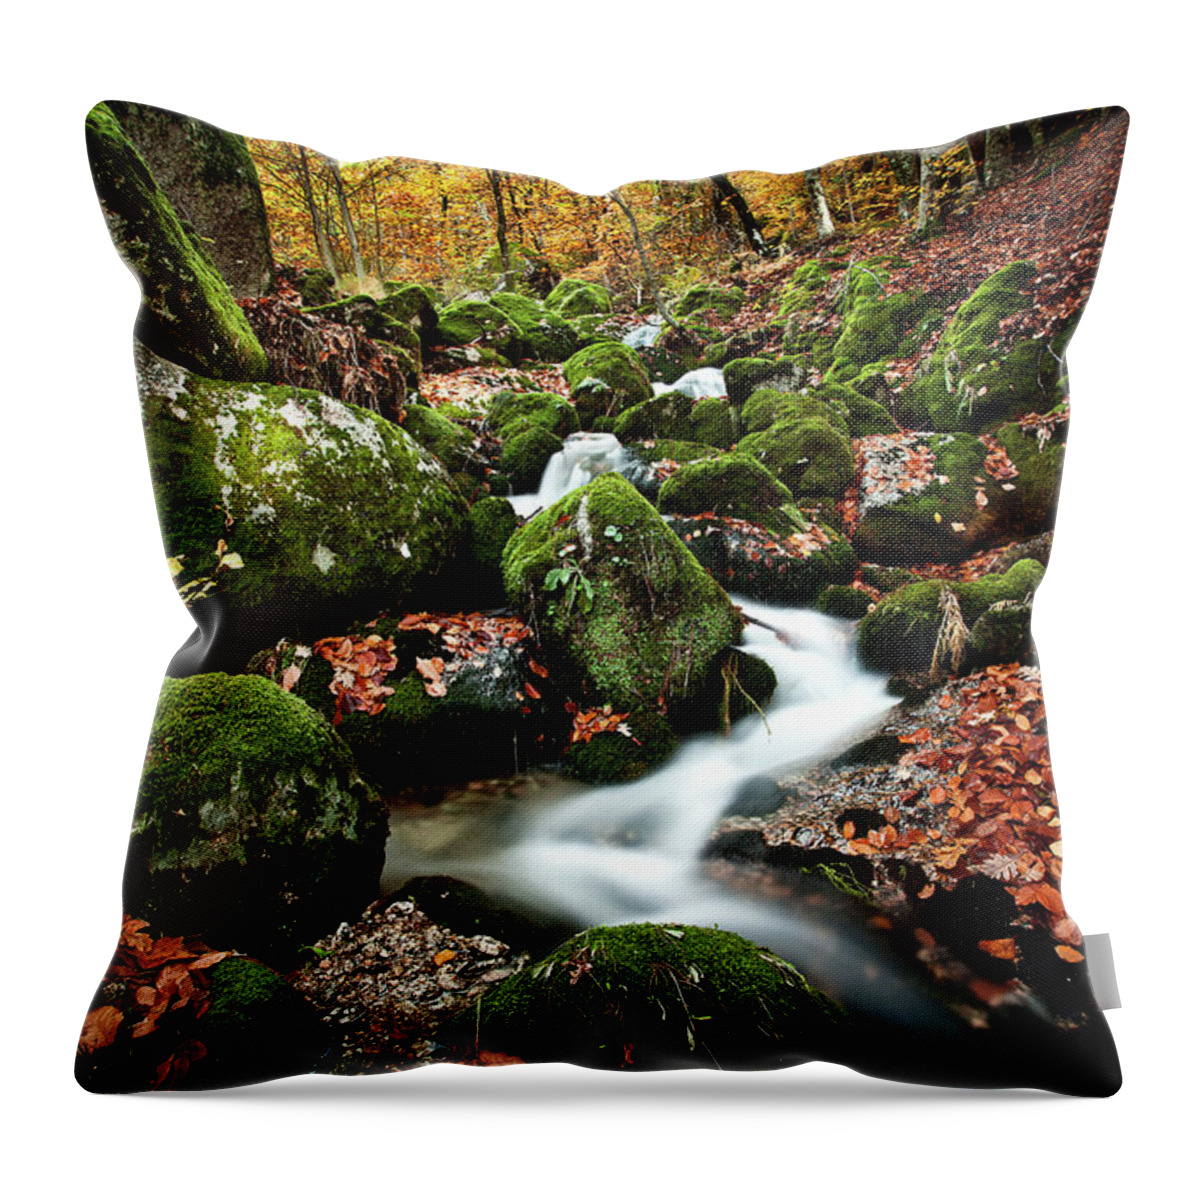 Jorgemaiaphotographer Throw Pillow featuring the photograph Flow by Jorge Maia